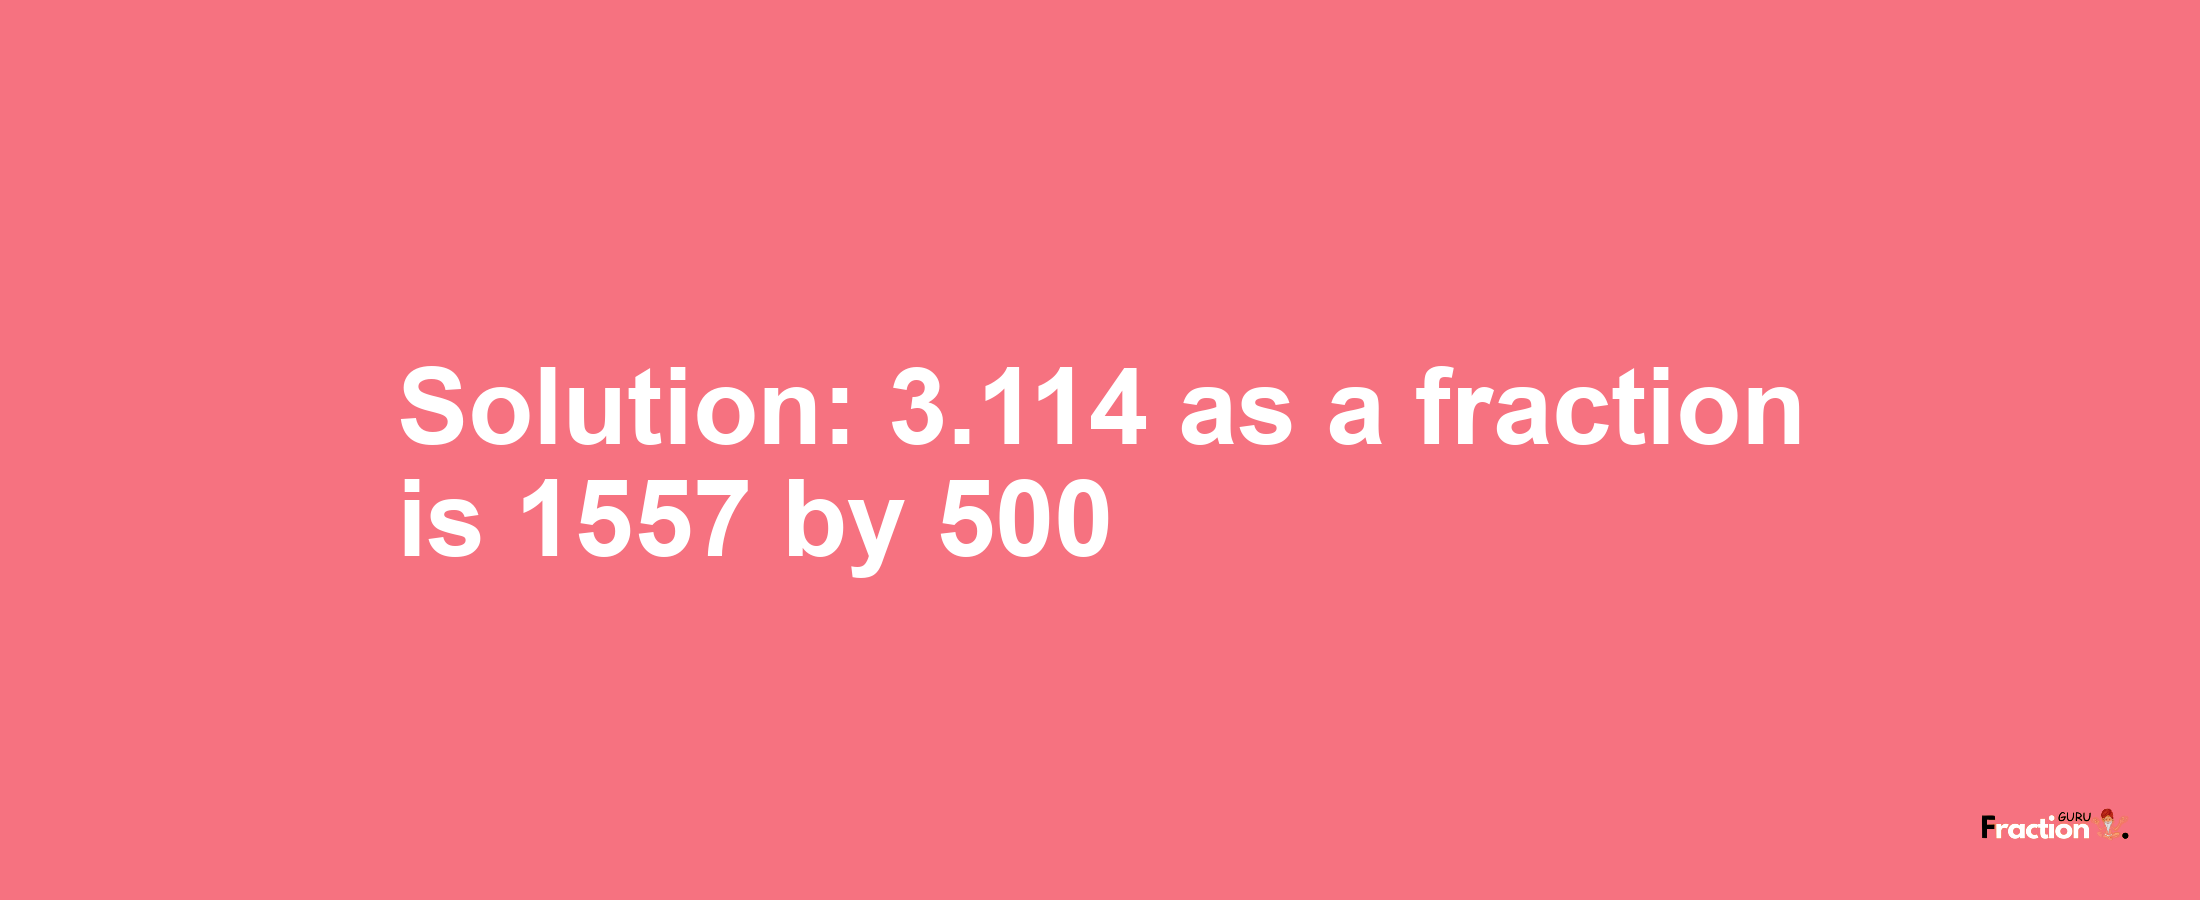 Solution:3.114 as a fraction is 1557/500